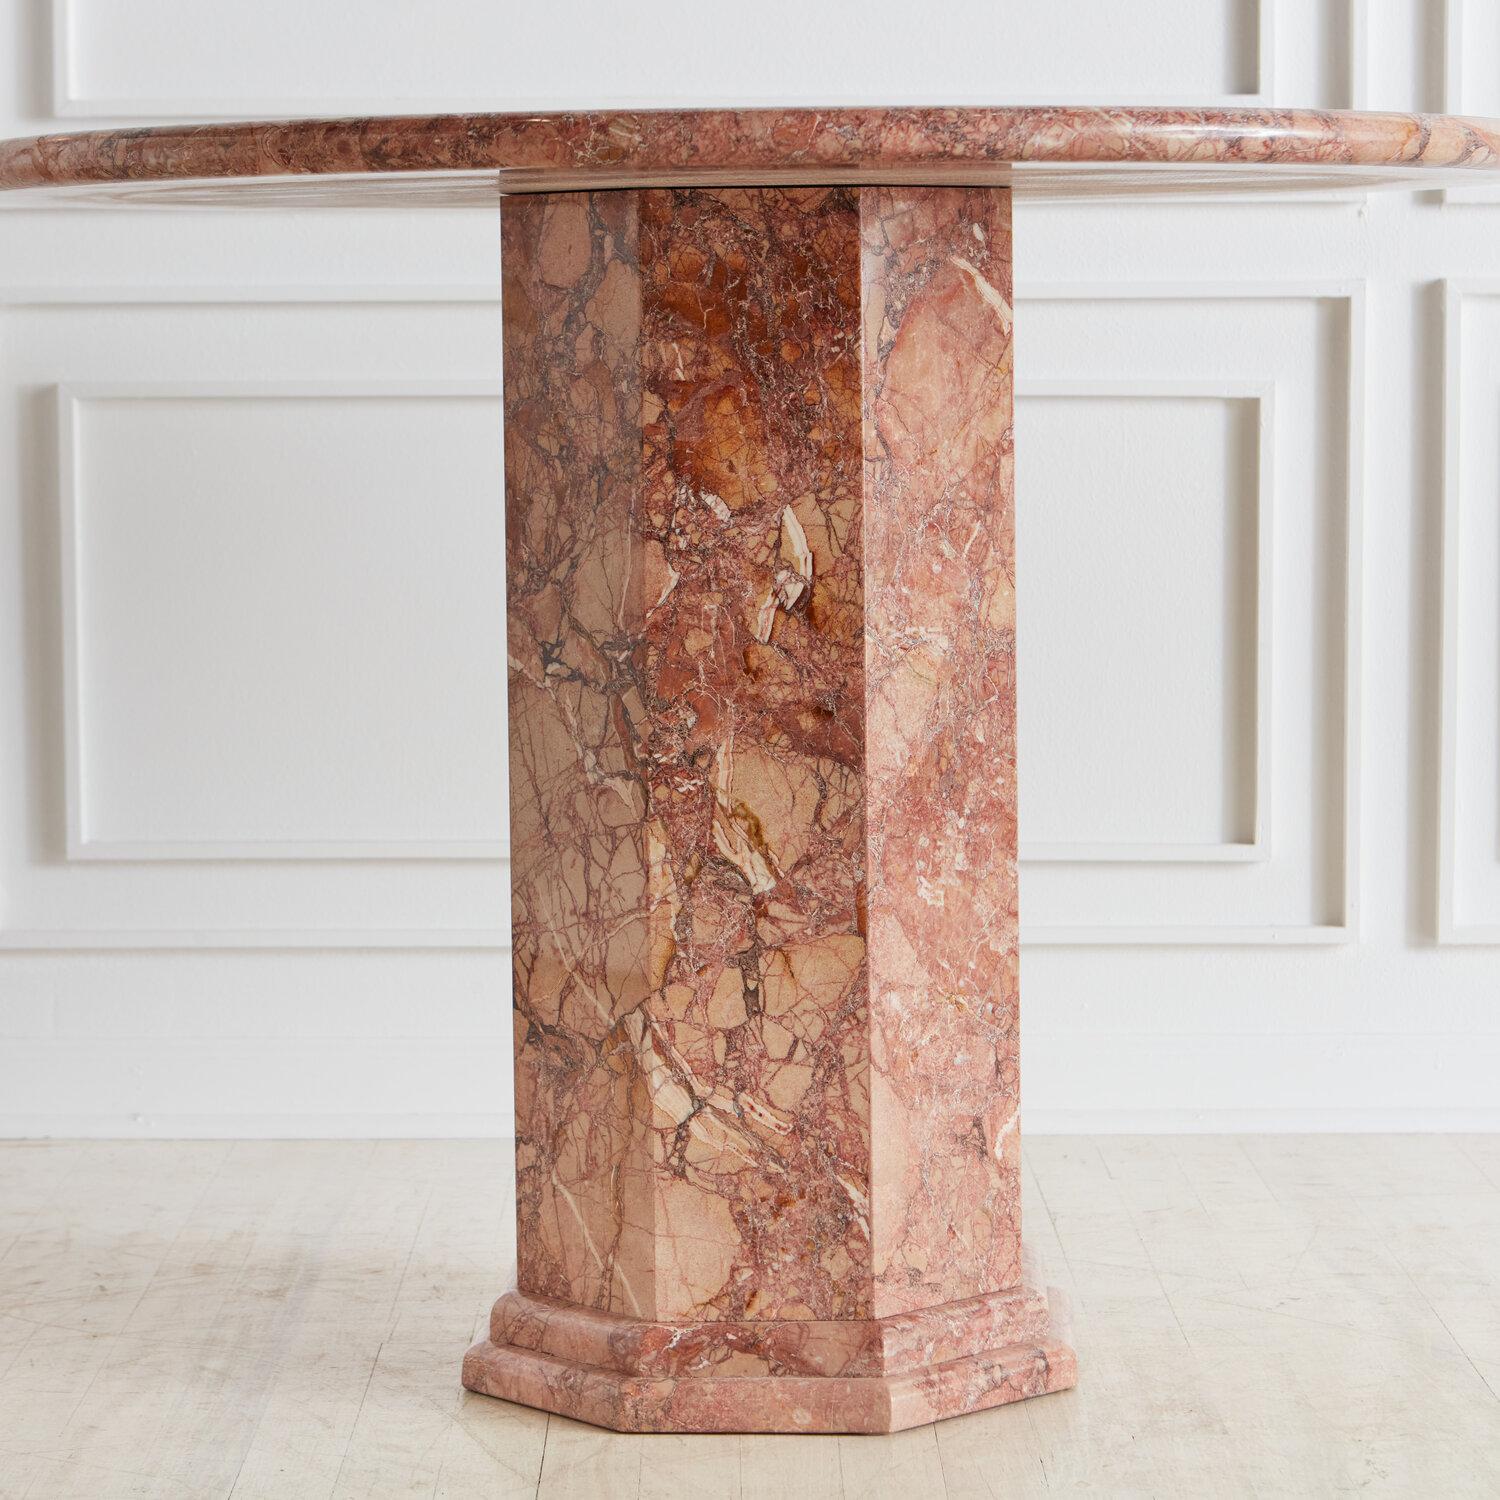 A stunning marble dining or entryway table with a round top resting on a hexagonal mitered edge base with a banded-edge detail. This table is made of Breccia Pernice and features gorgeous pink tones and beautiful marble veining.

This is an item